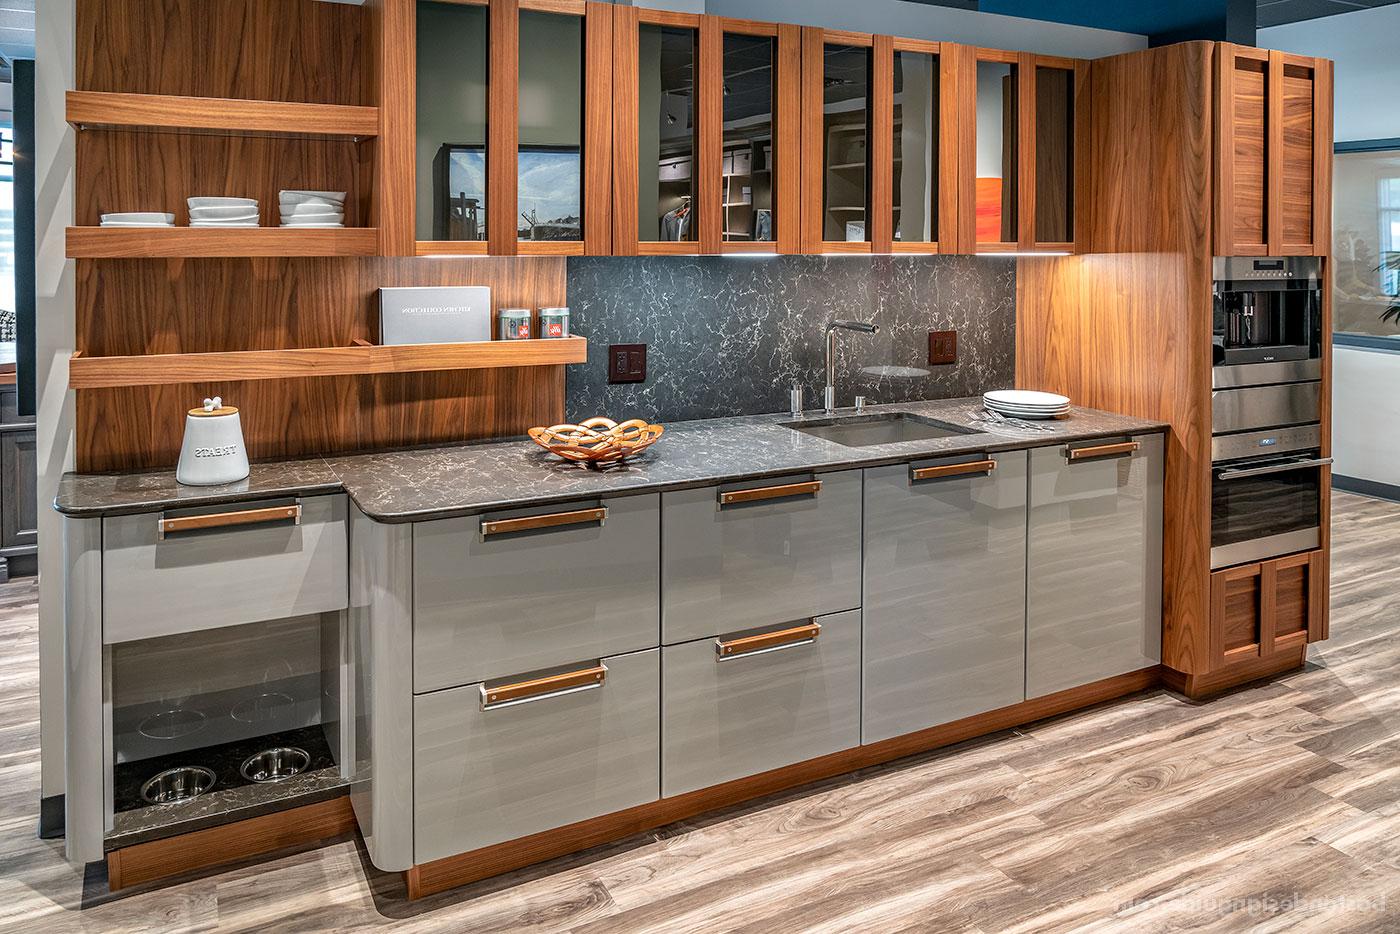 Interiology Design Studio Co. Custom Kitchen featuring Composit cabinetry